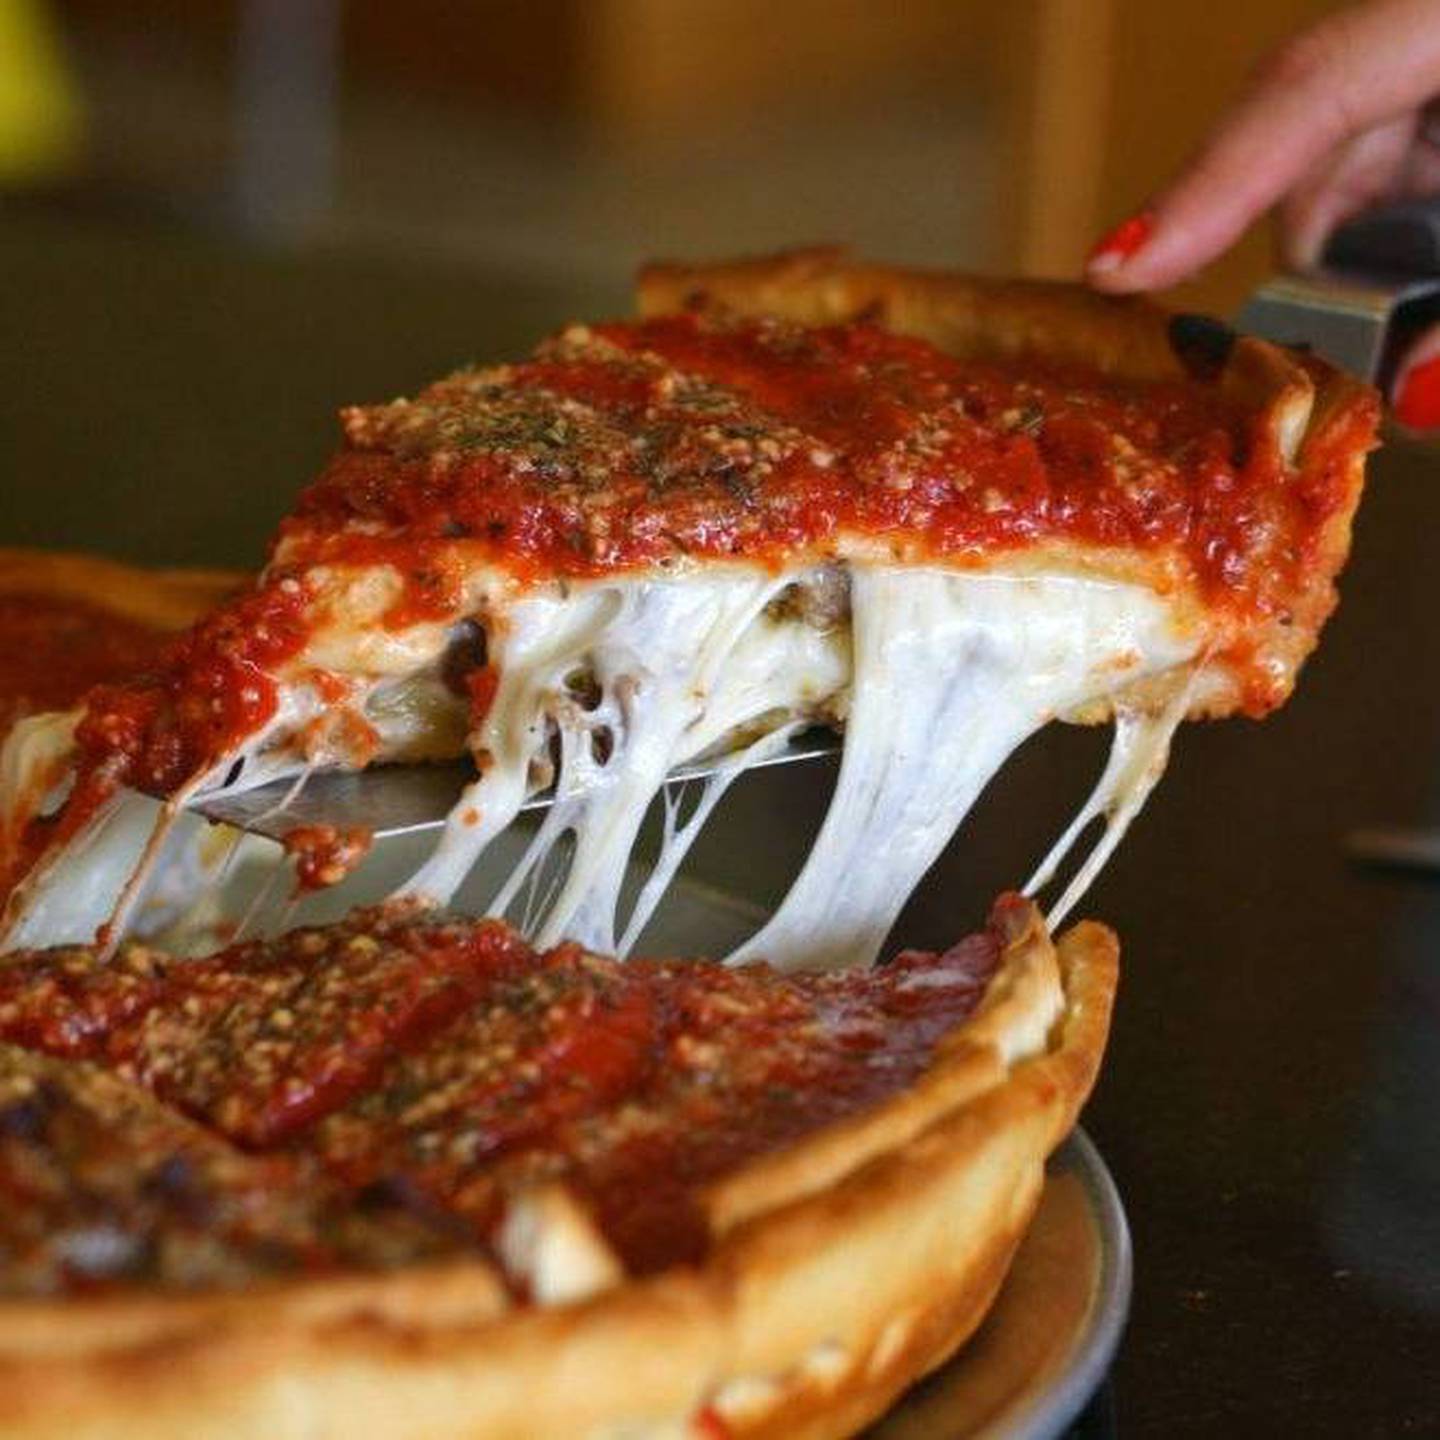 Beggars Pizza in Maywood was voted in the top nine pizza places in the Cook County area in 2021 by readers. (Photo from Beggars Pizza Facebook page)